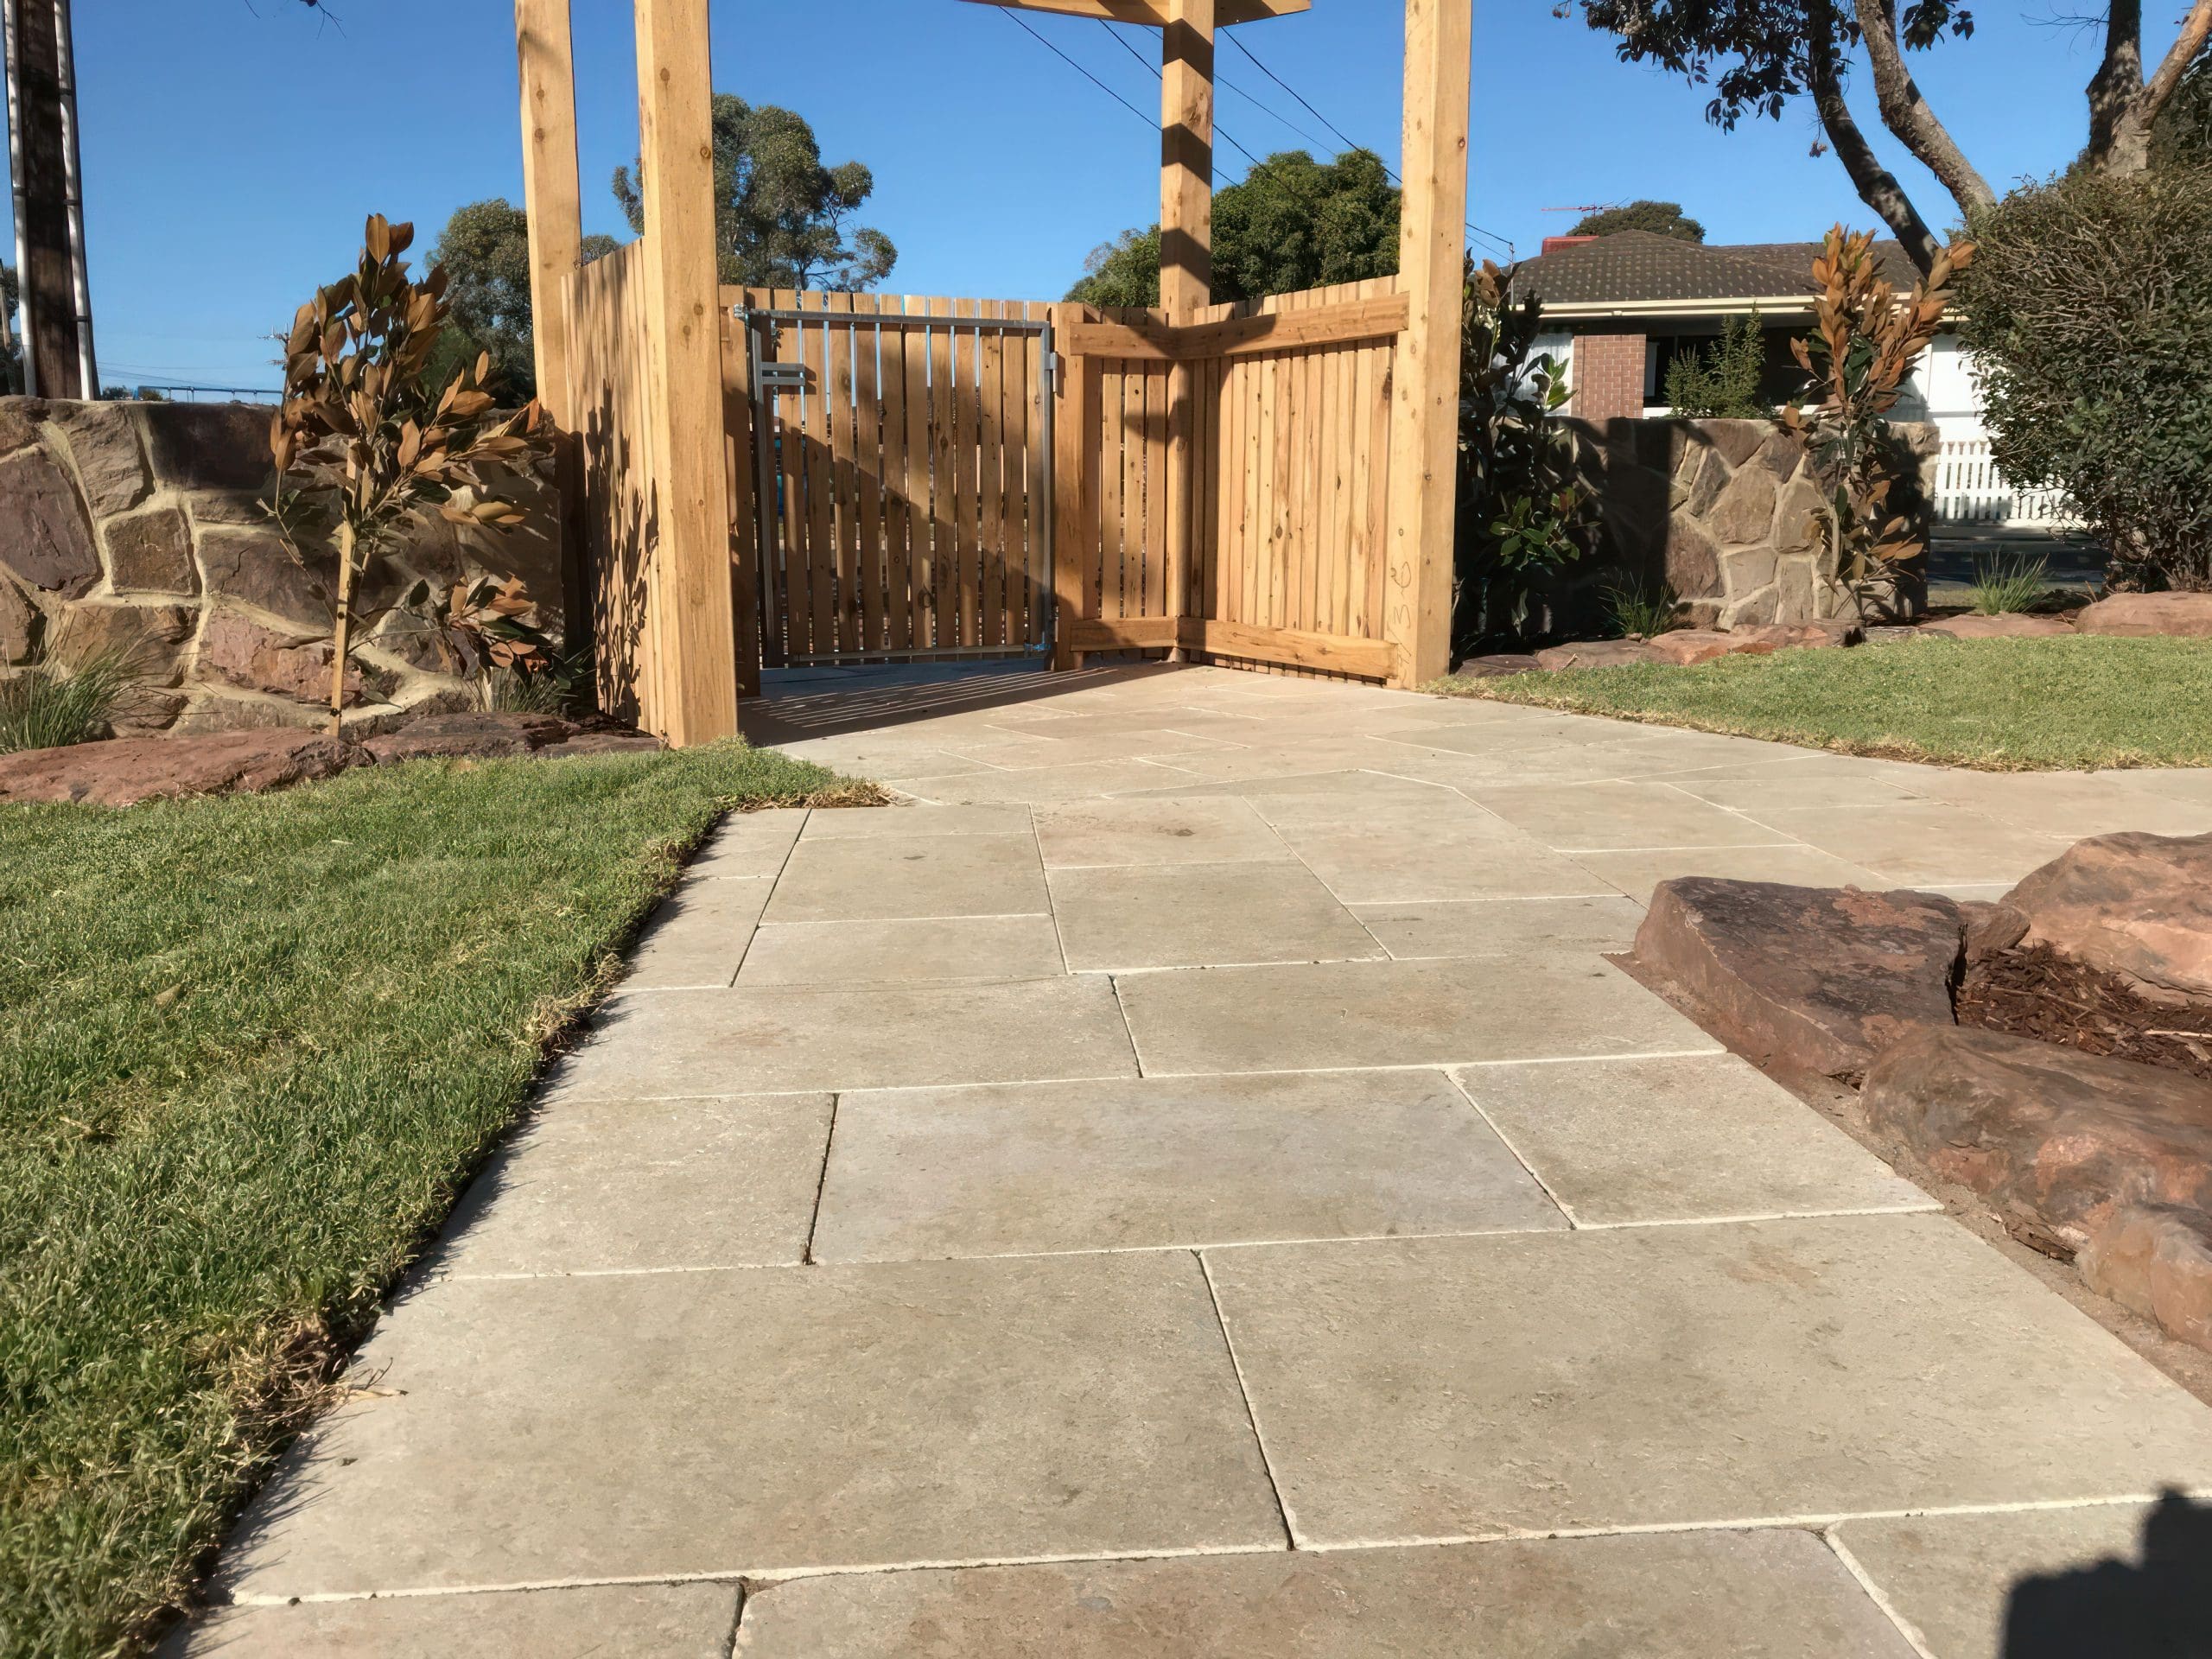 CREMA NOVELDA BRUSHED & TUMBLED LIMESTONE_RMS TRADERS_NATURAL STONE PAVERS POOL COPING INTERNAL TILE SUPPLIER MELBOURNE (11)